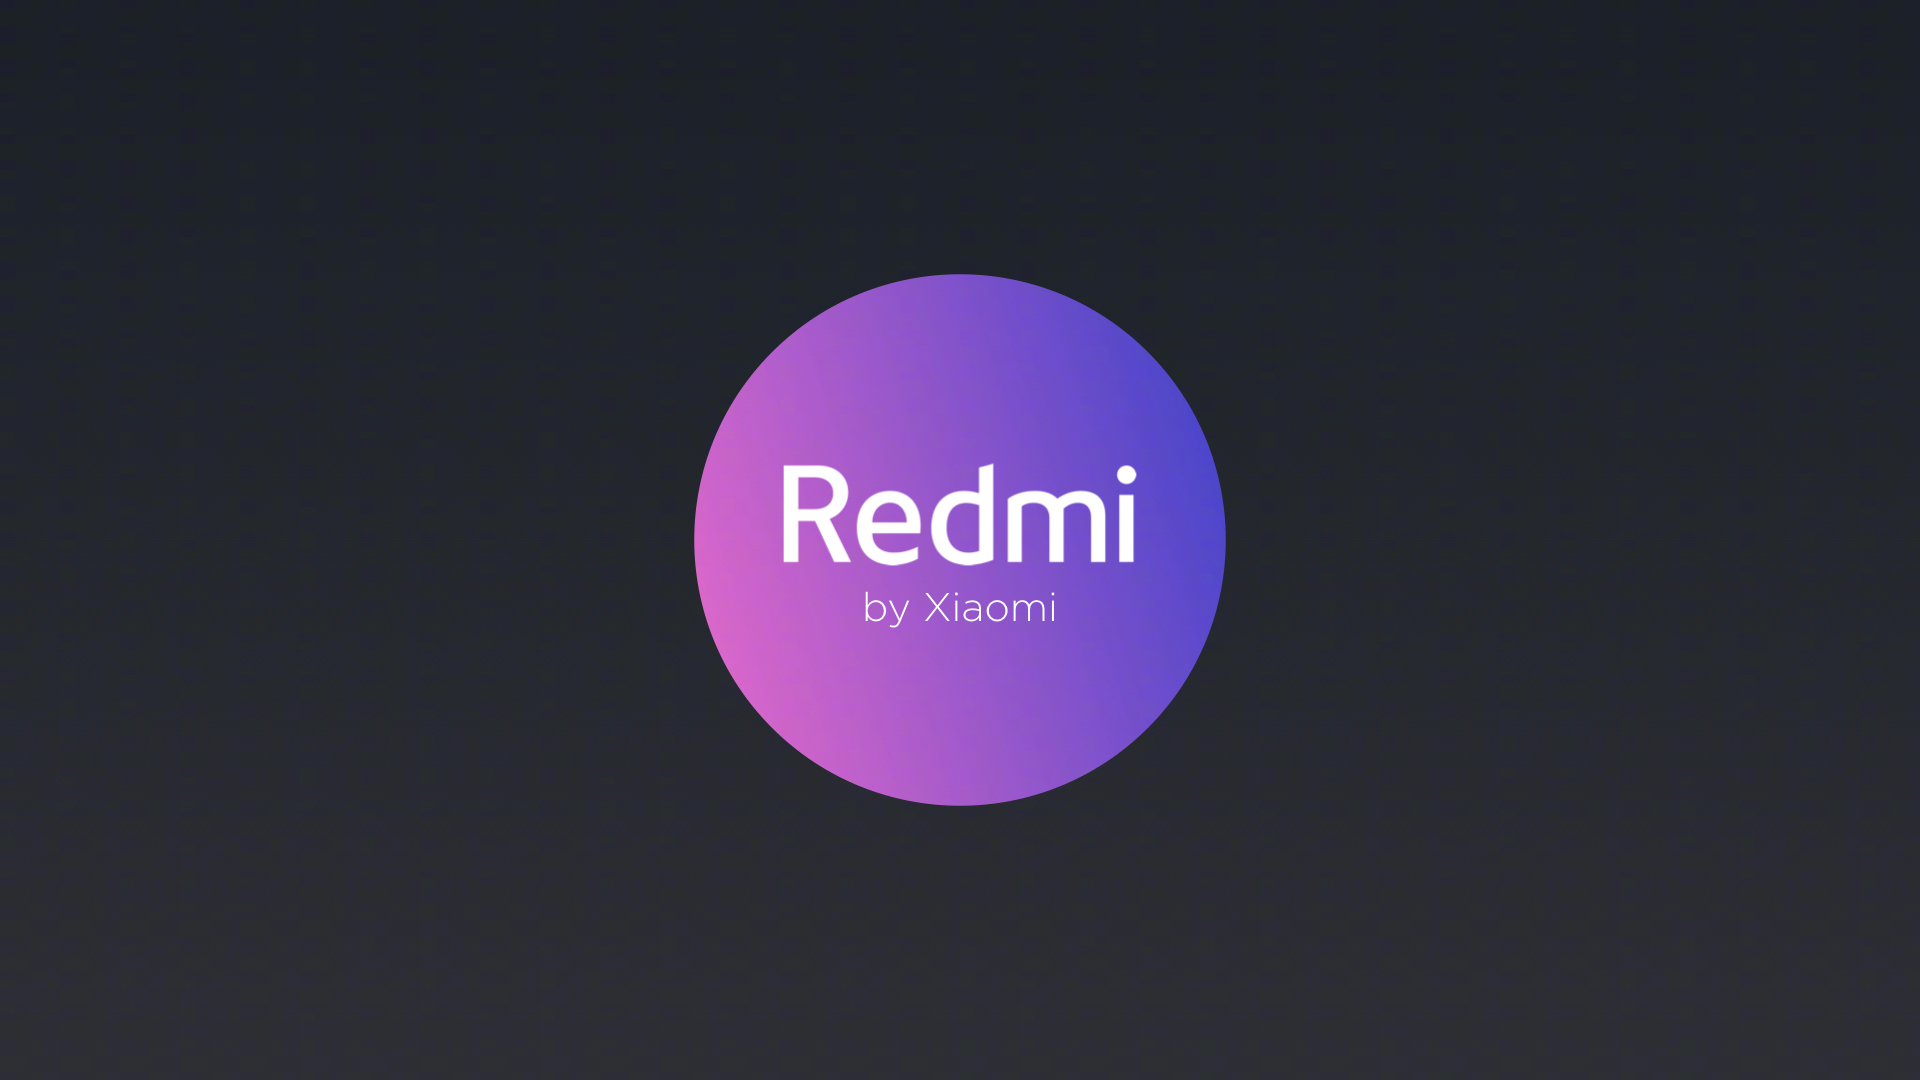 Redmi Brand Got Its Separate Logo Prior To The Launch